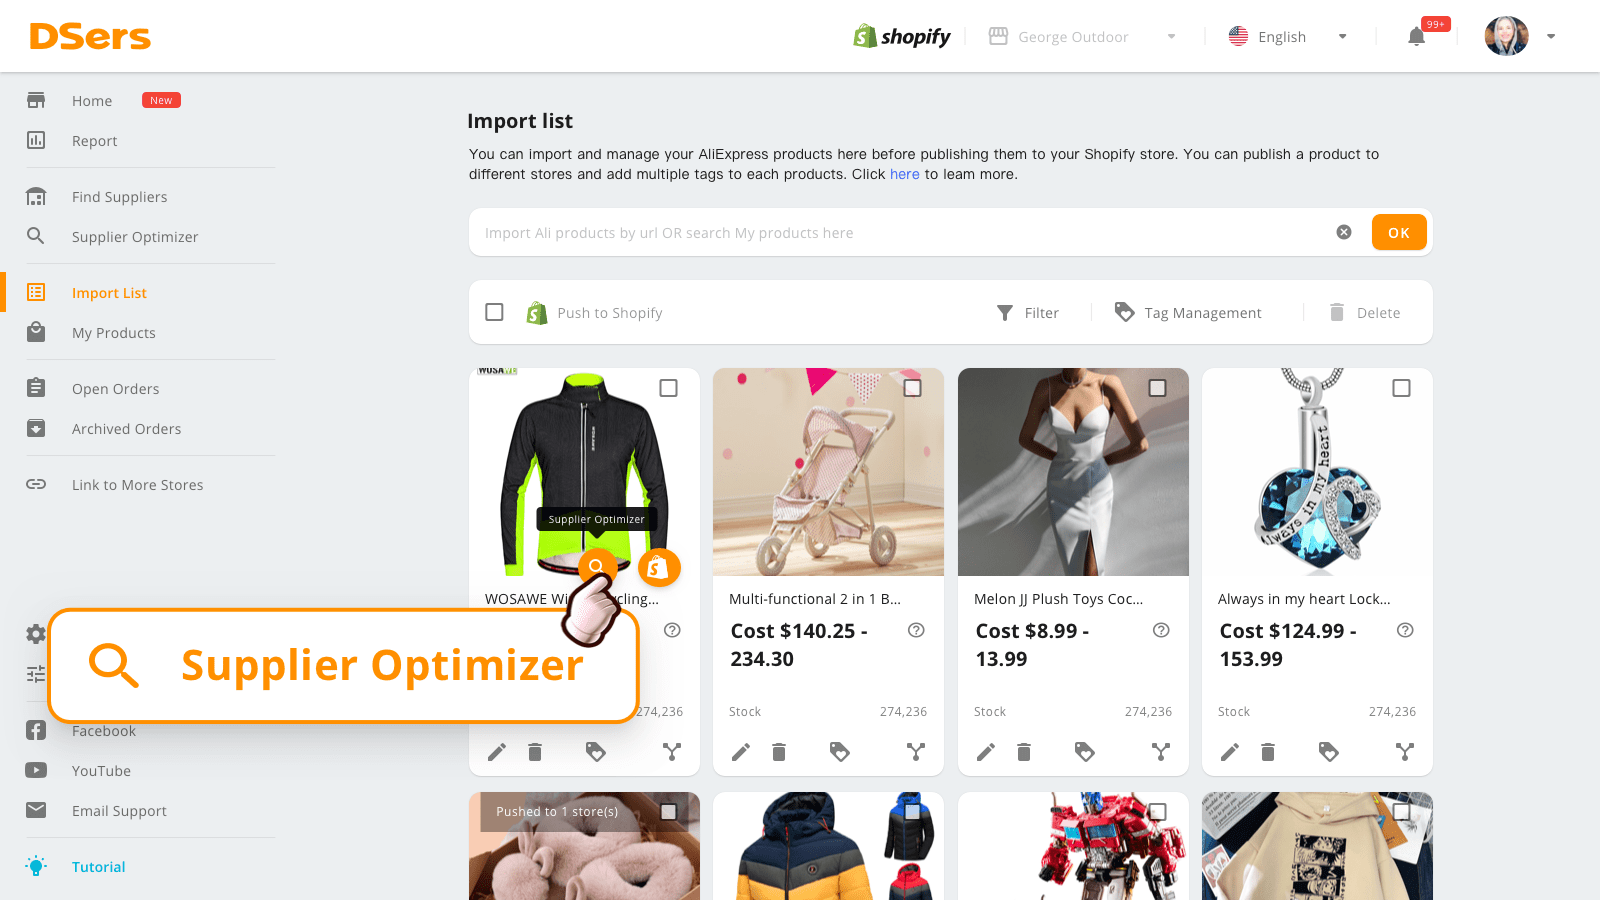 Product catalog on the DSers app with a cycling jacket, locket, dress, stroller, and other items